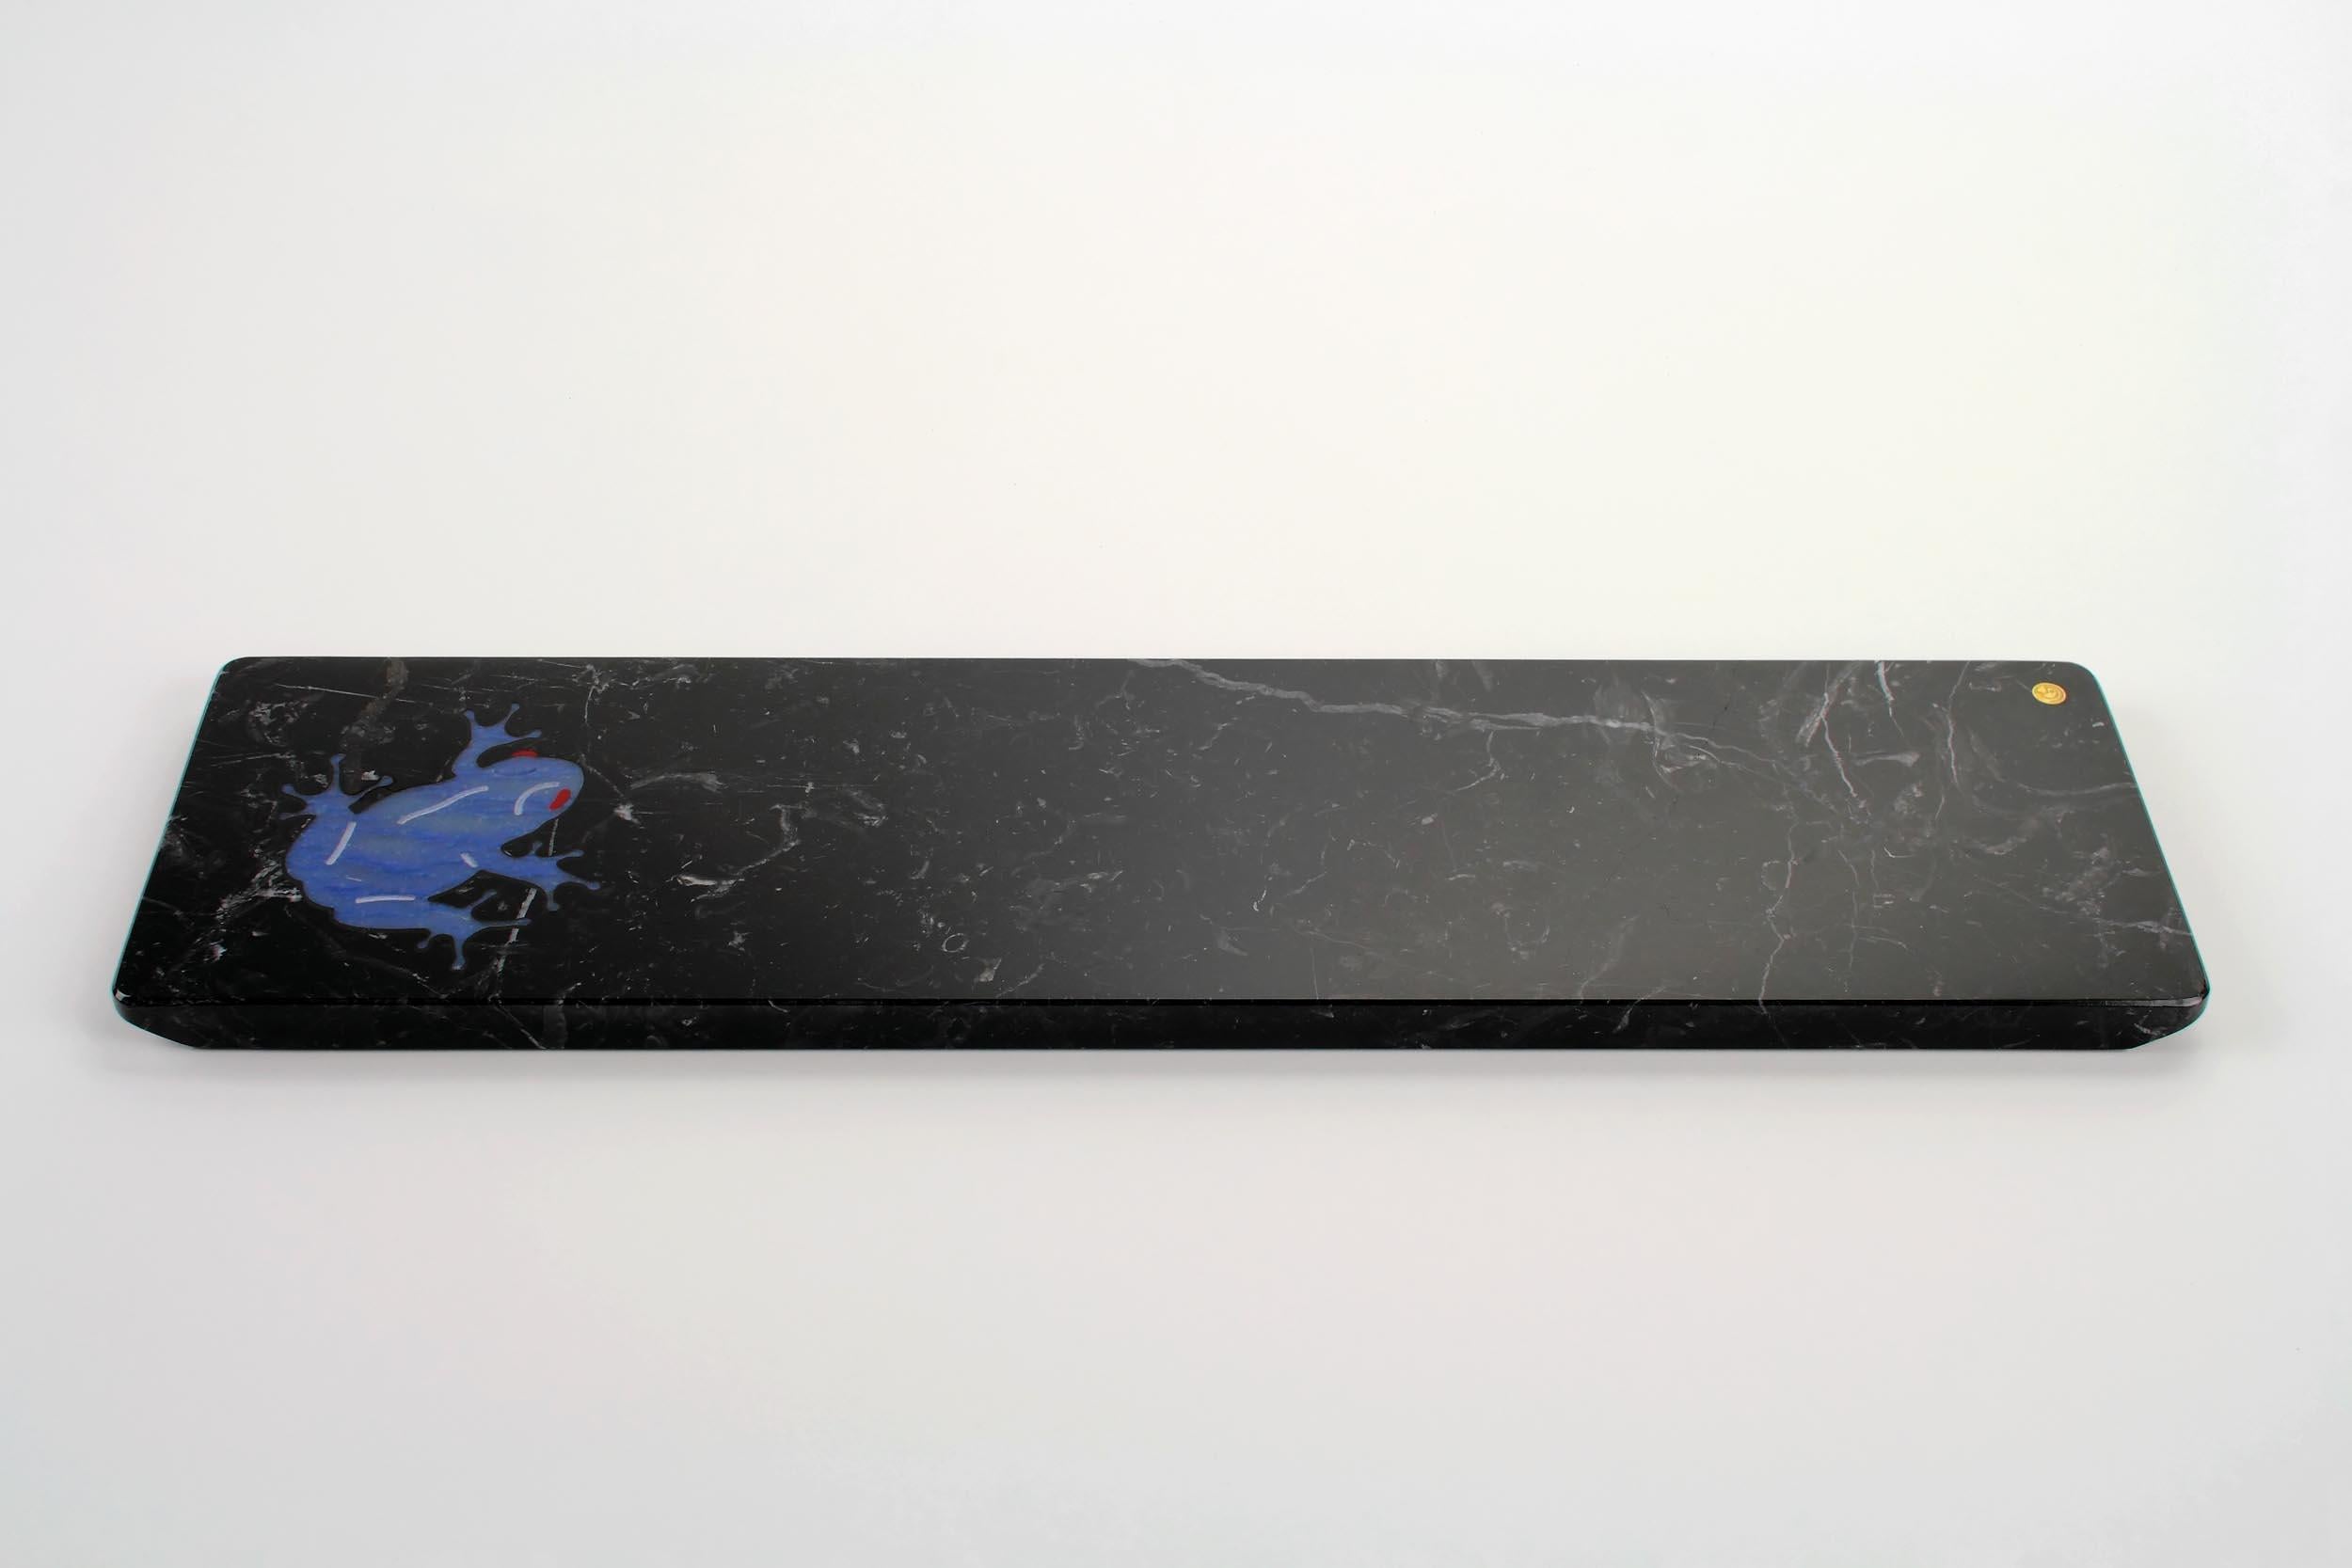 Centerpiece/Serving plate in Marquina marble with semi-precious quartzite Azul Macaubas inlay.

Dimensions: Medium L 45, W 12, H 1.5 cm

Also available: Big L 45, W 20.5, H 1.5 cm 

100% Hand made in Italy

Marble is a natural material, every piece